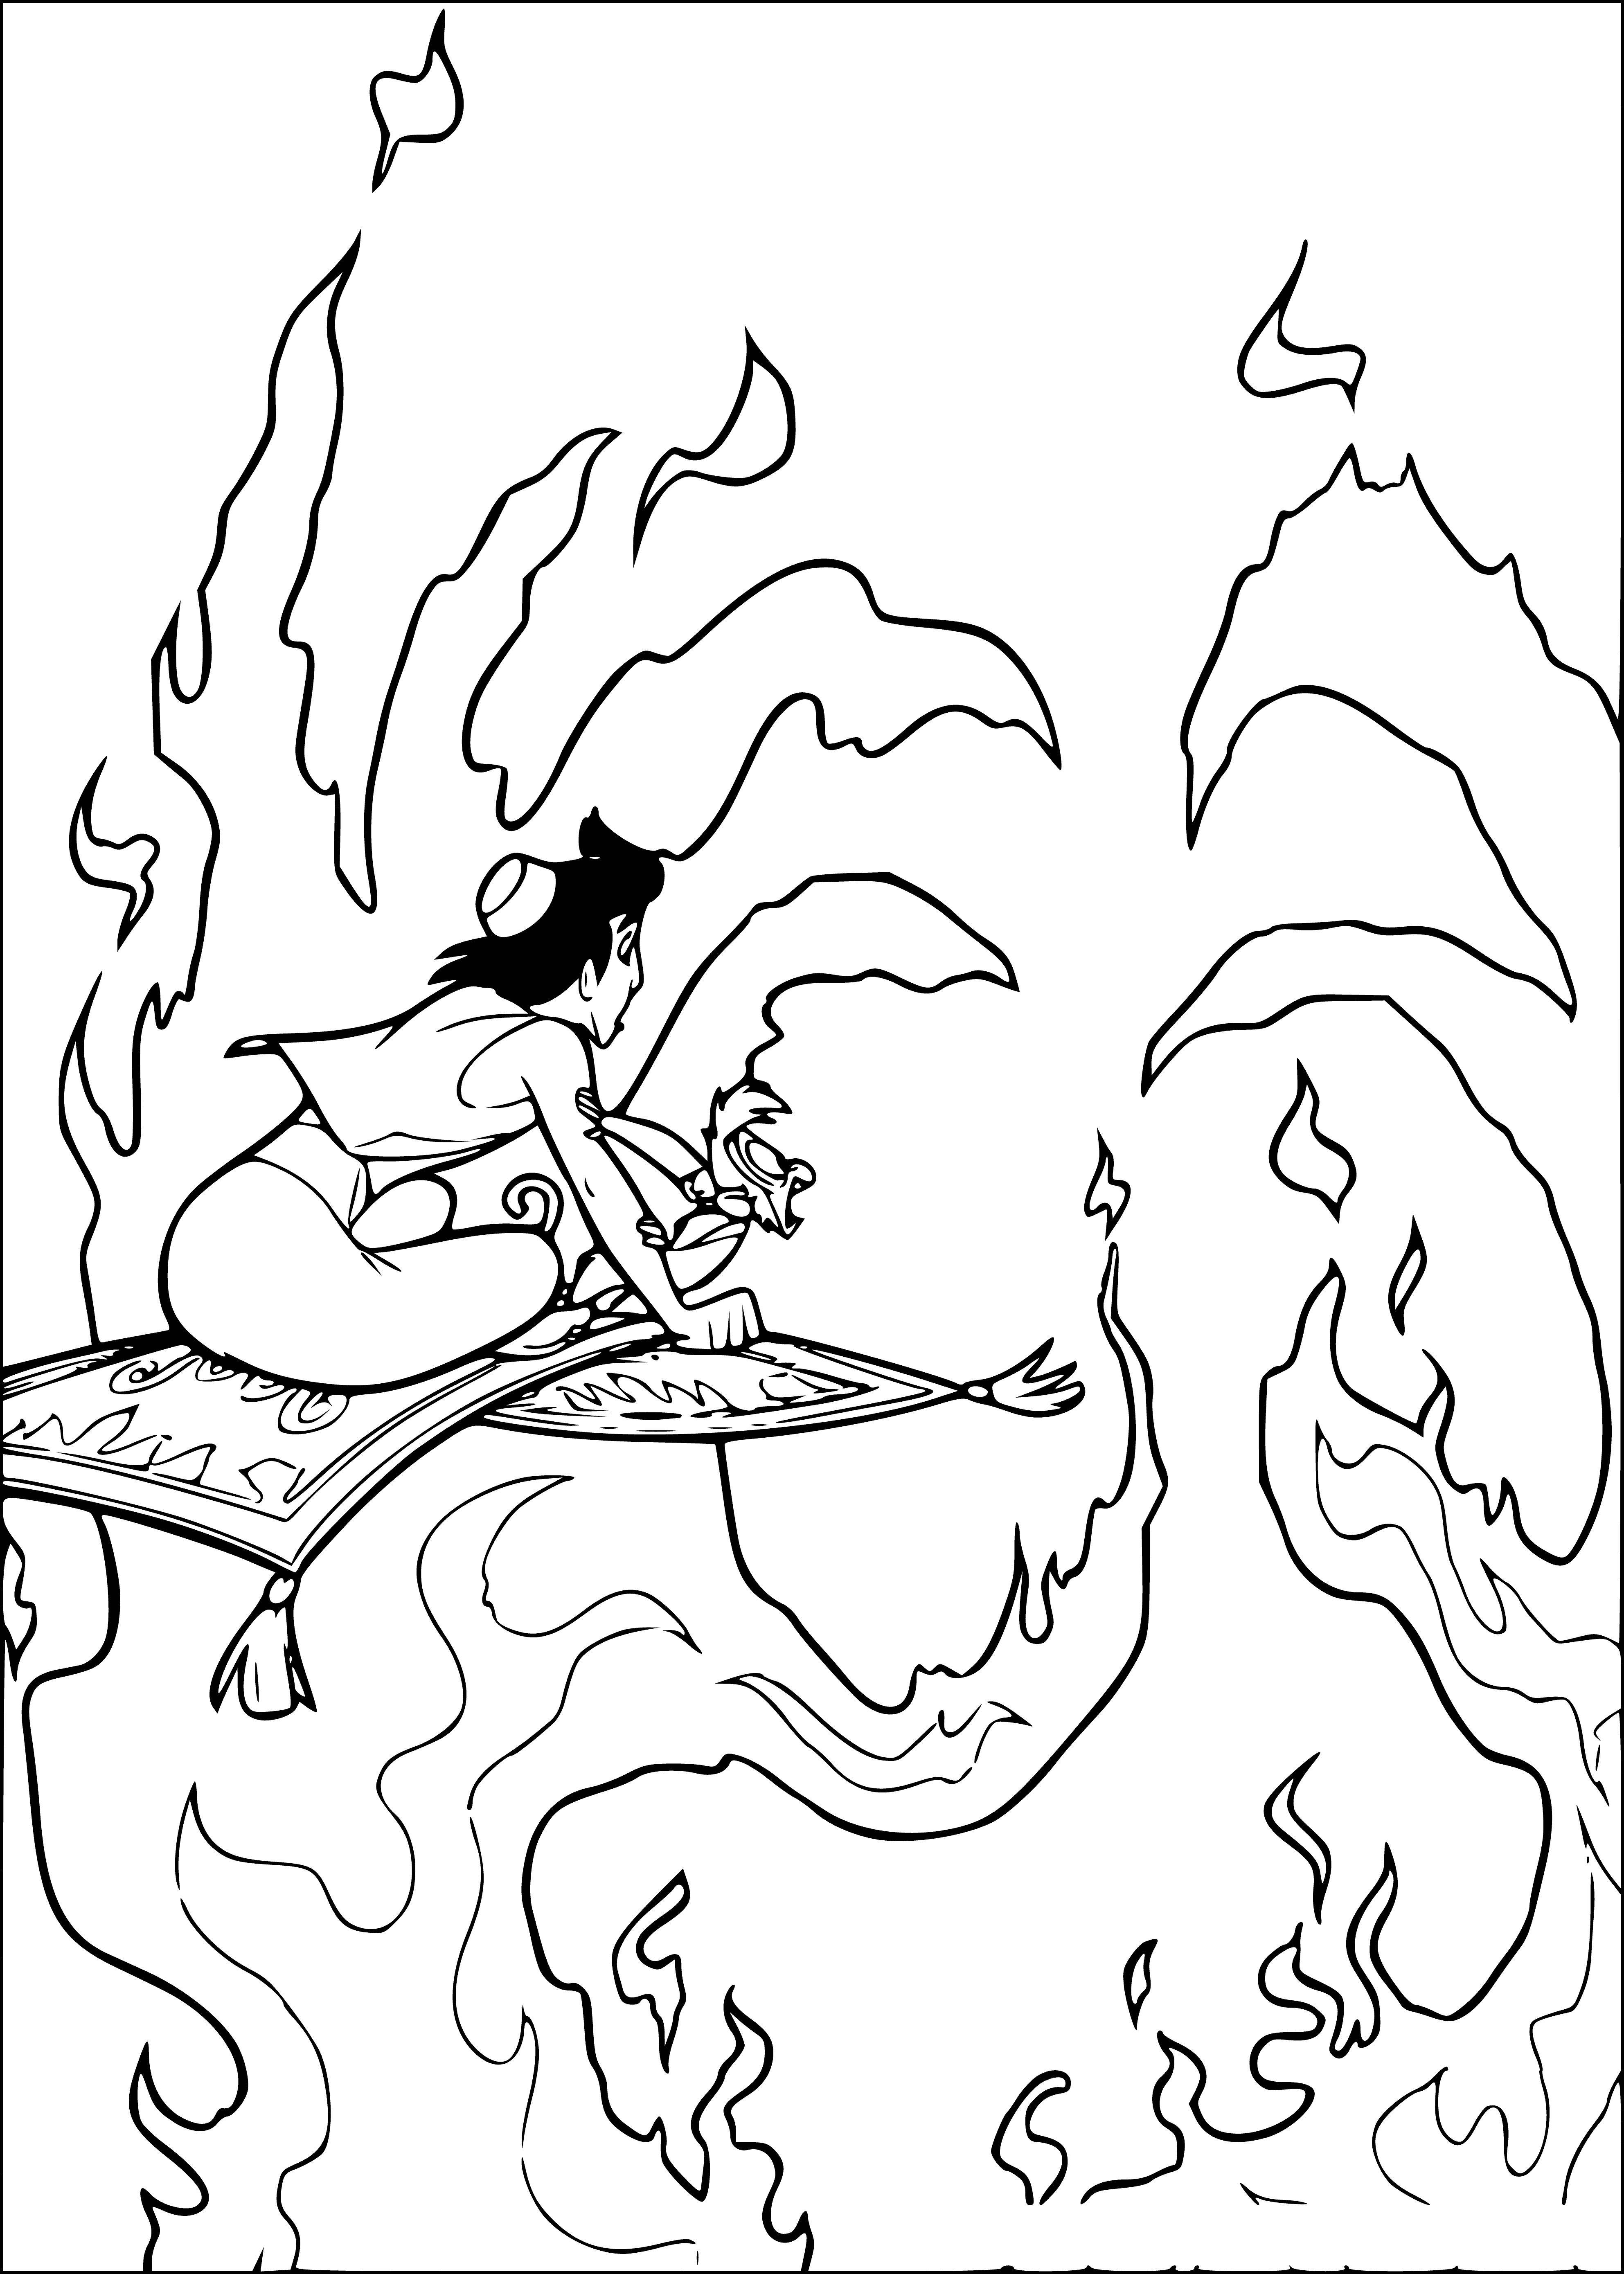 coloring page: Aladdin and Genie stand in front of a wall of flames, with the Genie holding a giant fireball. #Aladdin #Genie